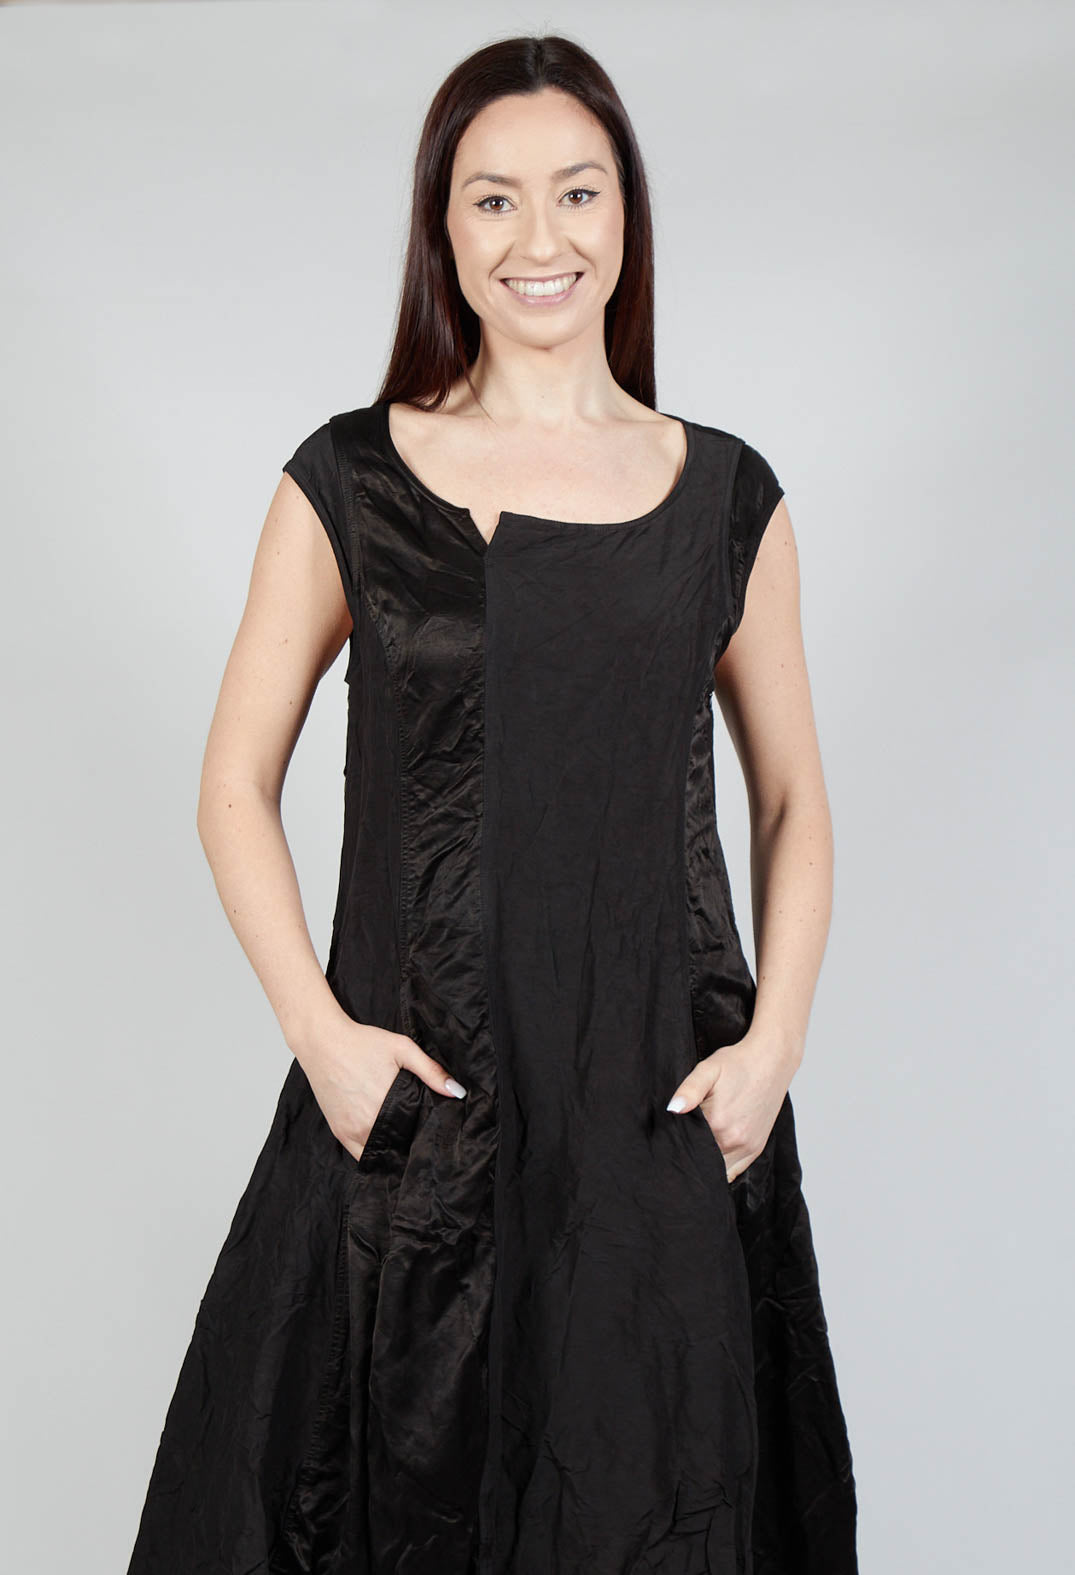 Reconstructed Dress in Black